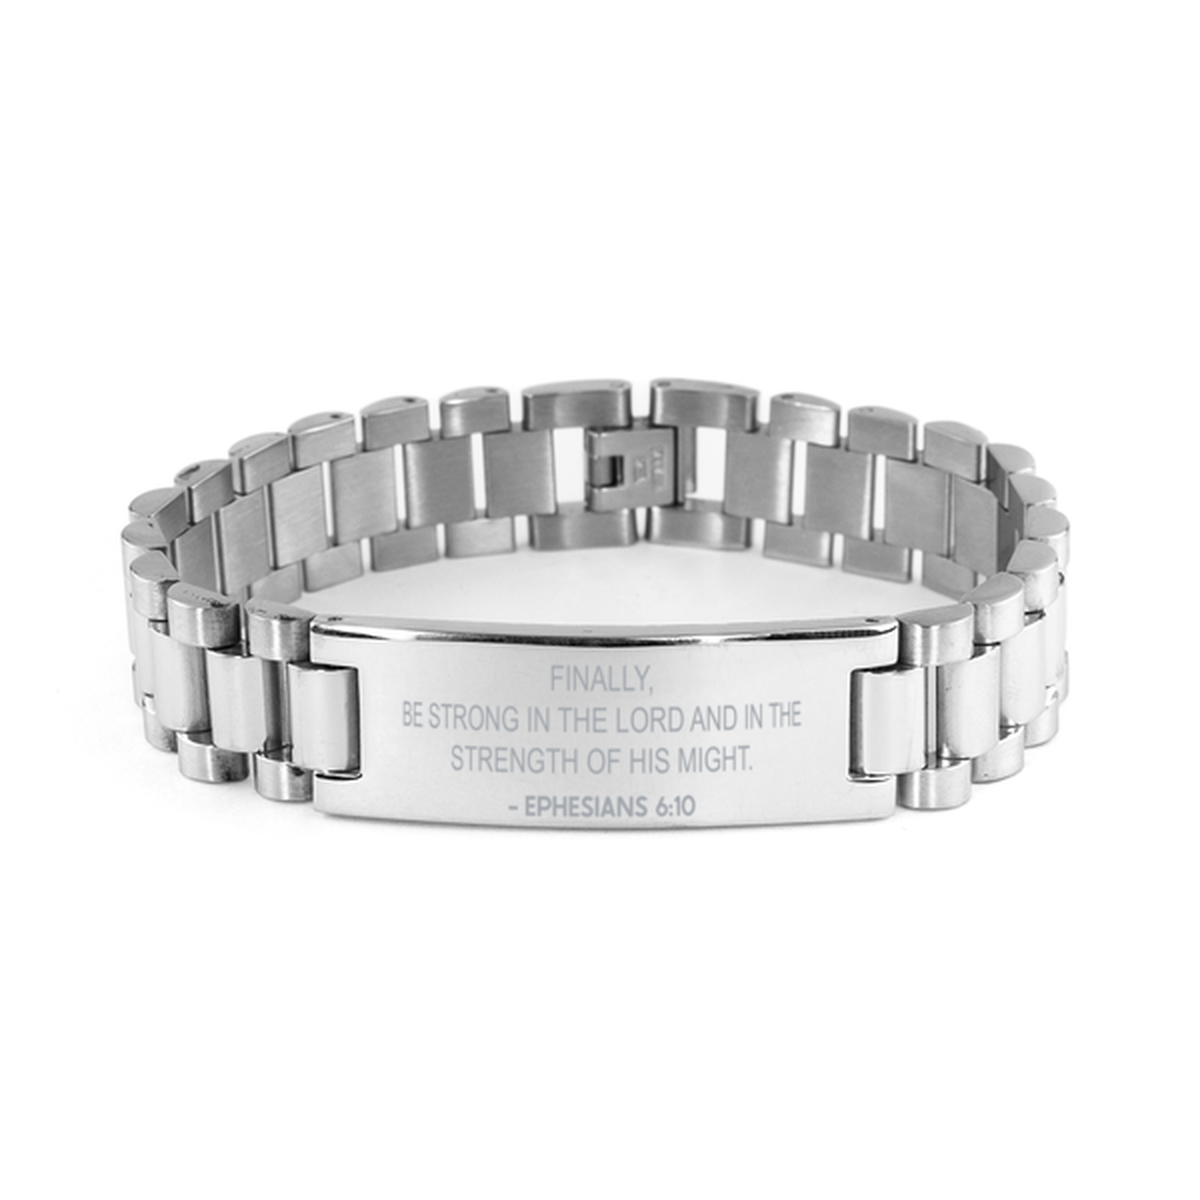 Christian Ladder Stainless Steel Bracelet, Ephesians 6:10 Finally, Be Strong In The Lord And In The, Motivational Bible Verse Gifts For Men Women